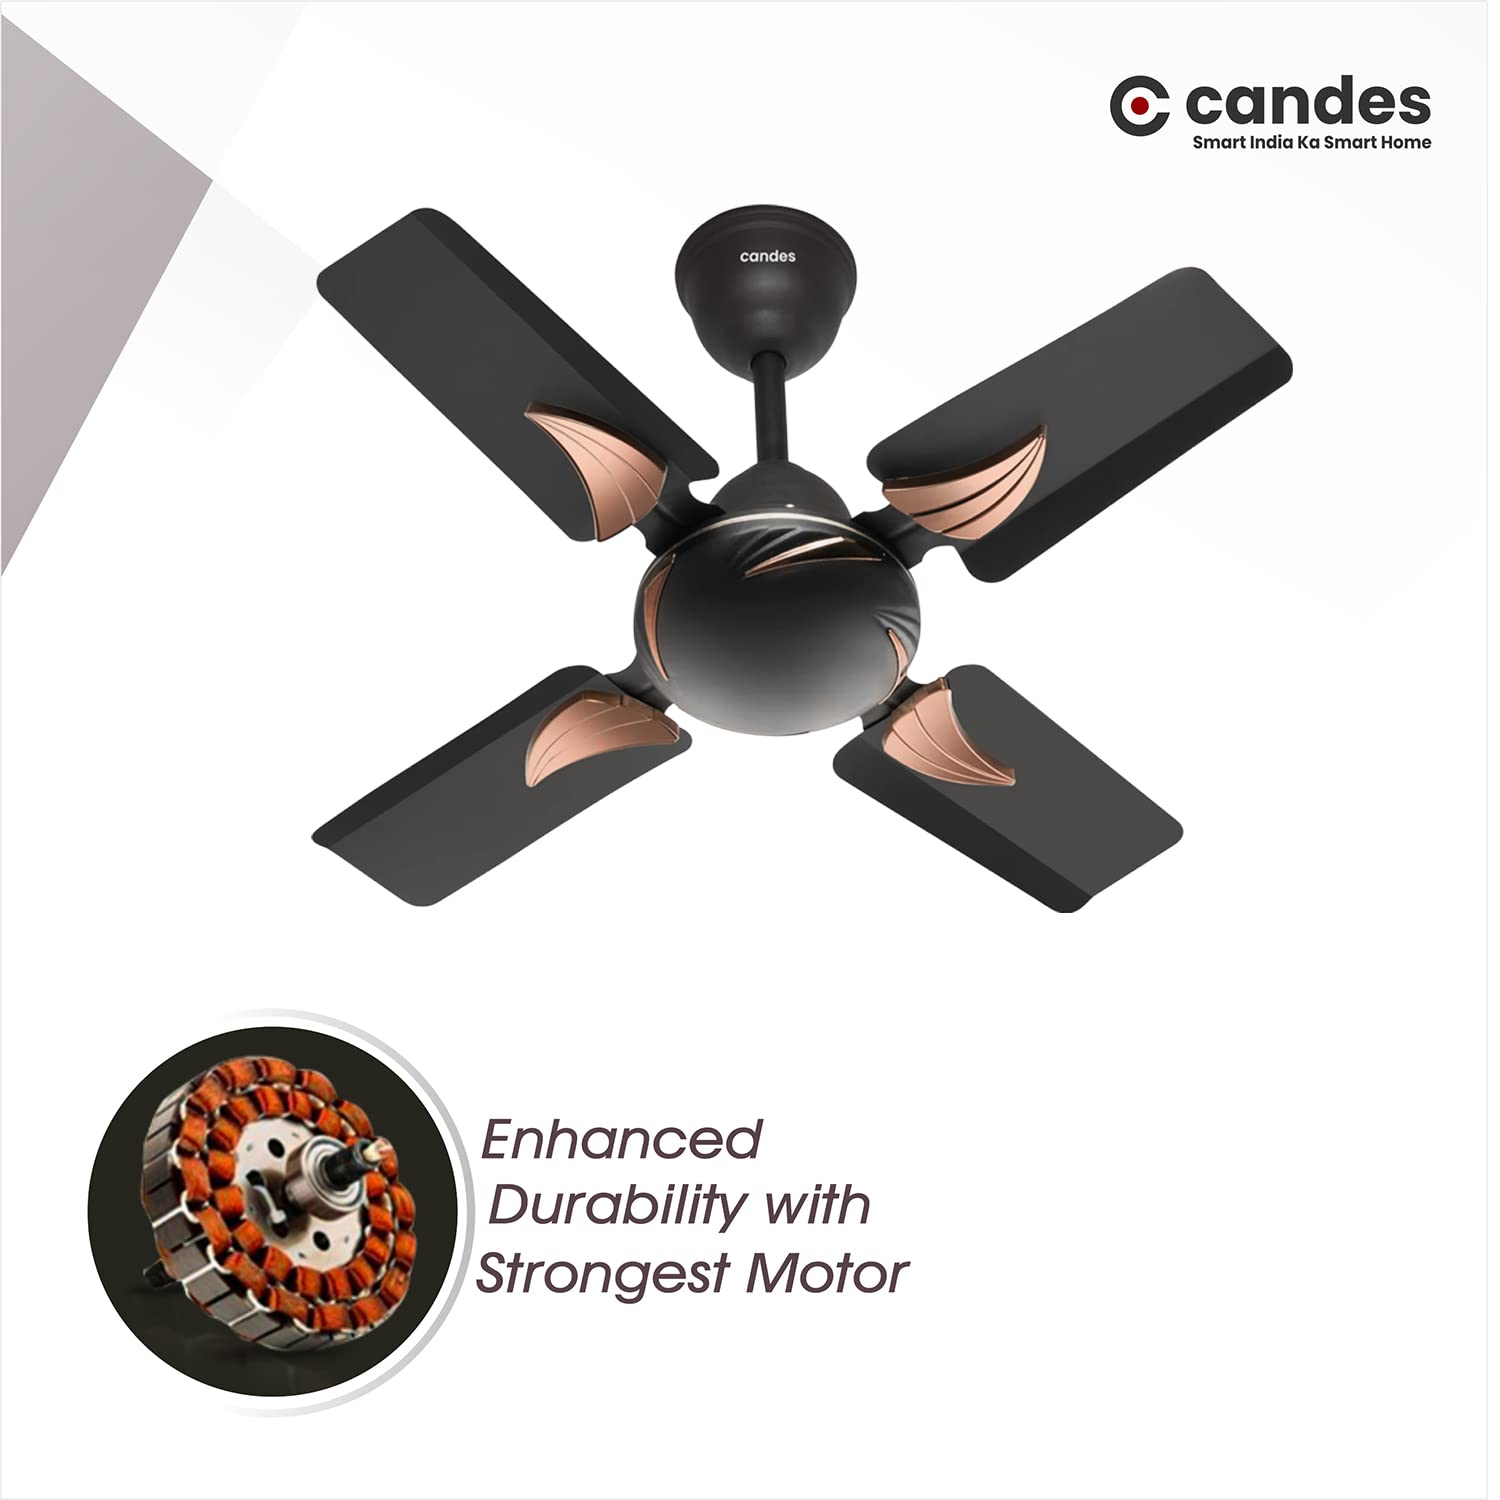 Candes EON High Speed 24Inch / 600 mm Anti-dust Decorative 405 RPM, 3 Star Rated Ceiling Fan 2 Yrs Warranty Coffee Brown Pack of 2